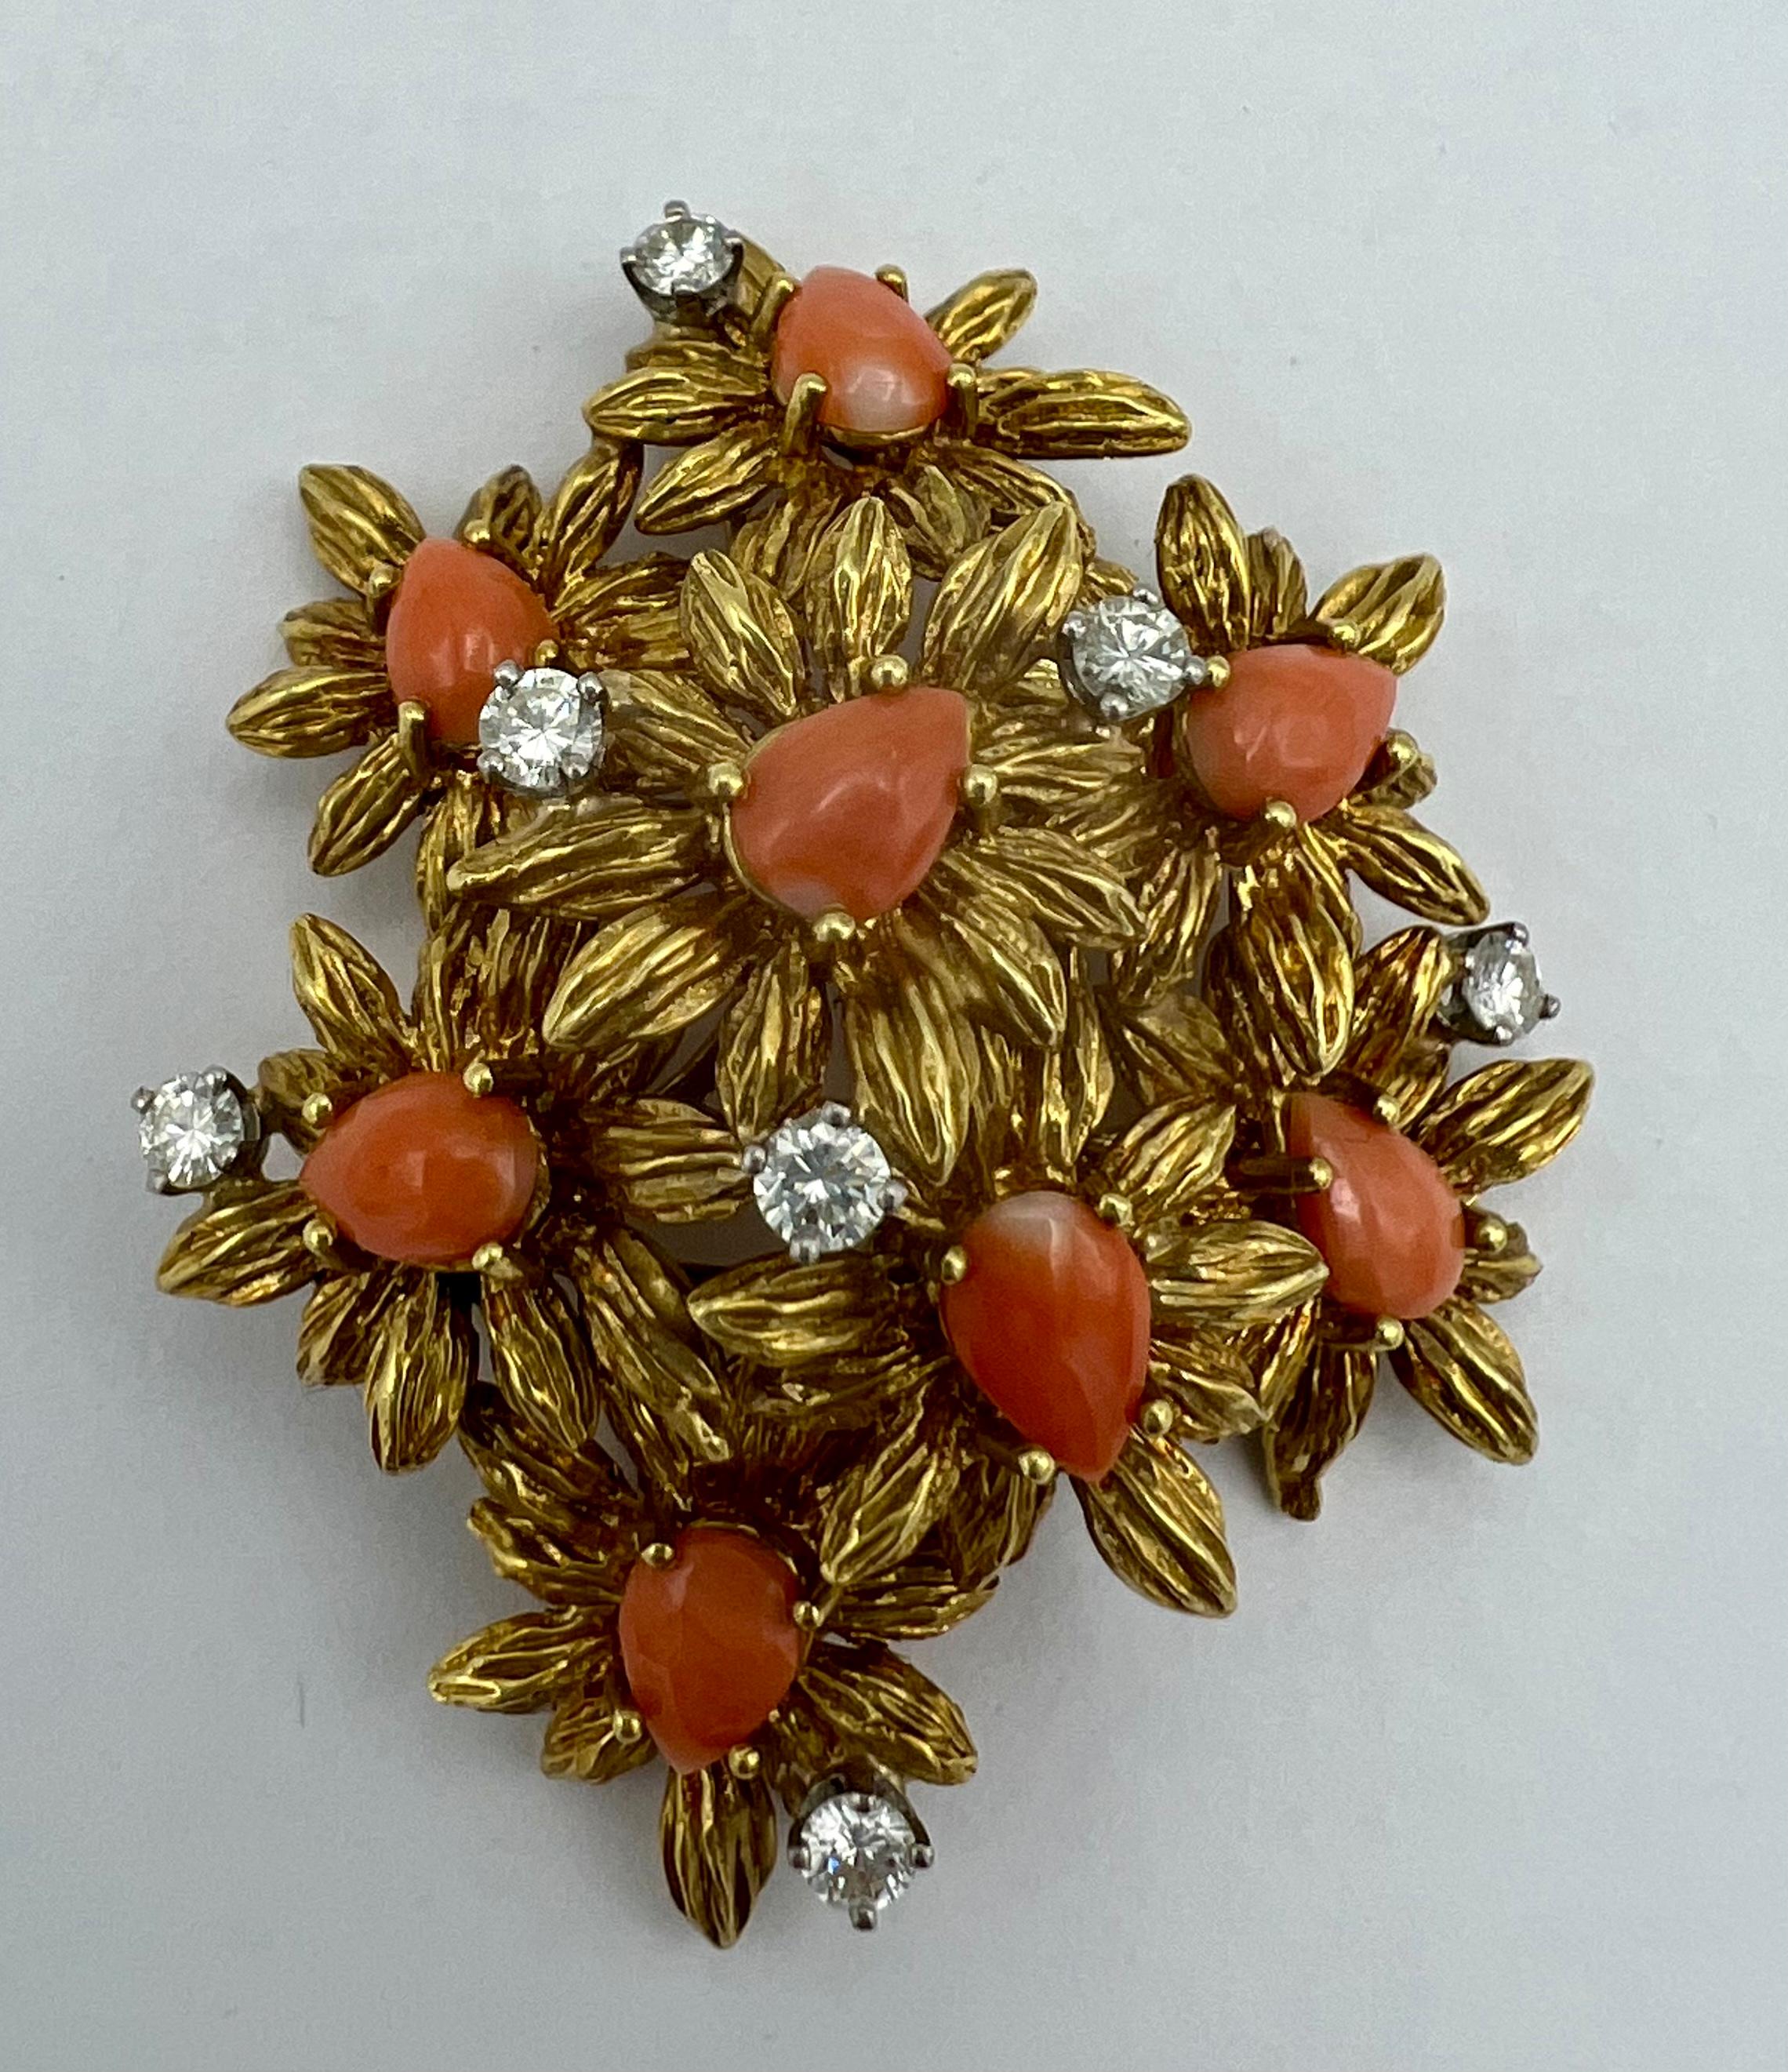 CIRCA: 1950’s
MATERIALS: 18k Yellow Gold
GEMSTONE: 0.91 cts. Diamond
GEMSTONE 2: Coral
WEIGHT: 33.3 grams
MEASUREMENTS: 2- 1/8” x 1- 3/4”
ITEM DETAILS:
An amazing 18k gold, coral and diamond floral brooch

This vintage gold brooch is designed as a